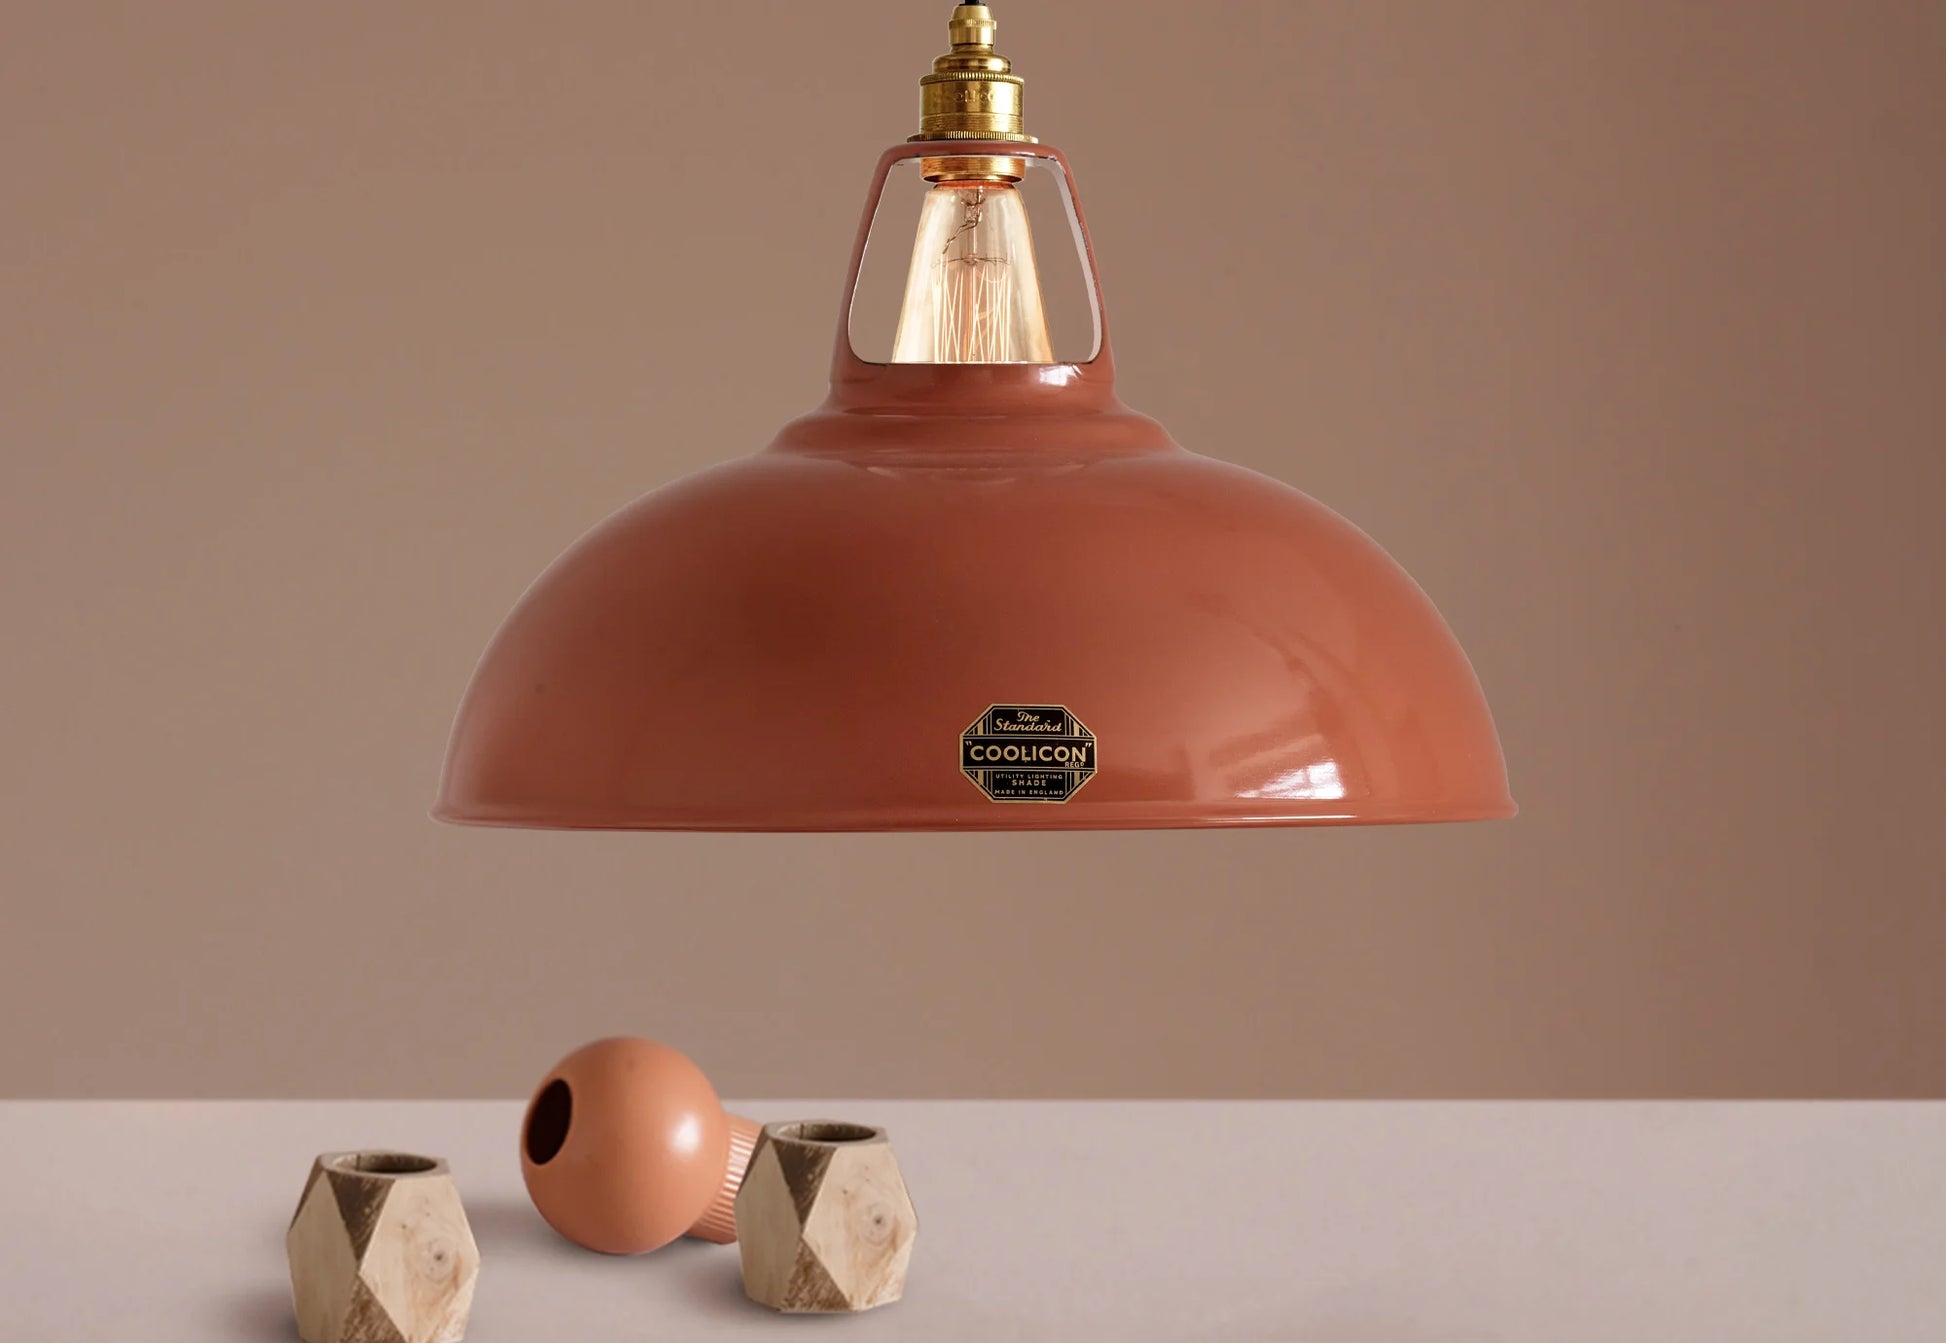 A Large Coolicon Terracotta lampshade hanging over a plinth. Below the shade is a small orange flower vase and a small wooden vase